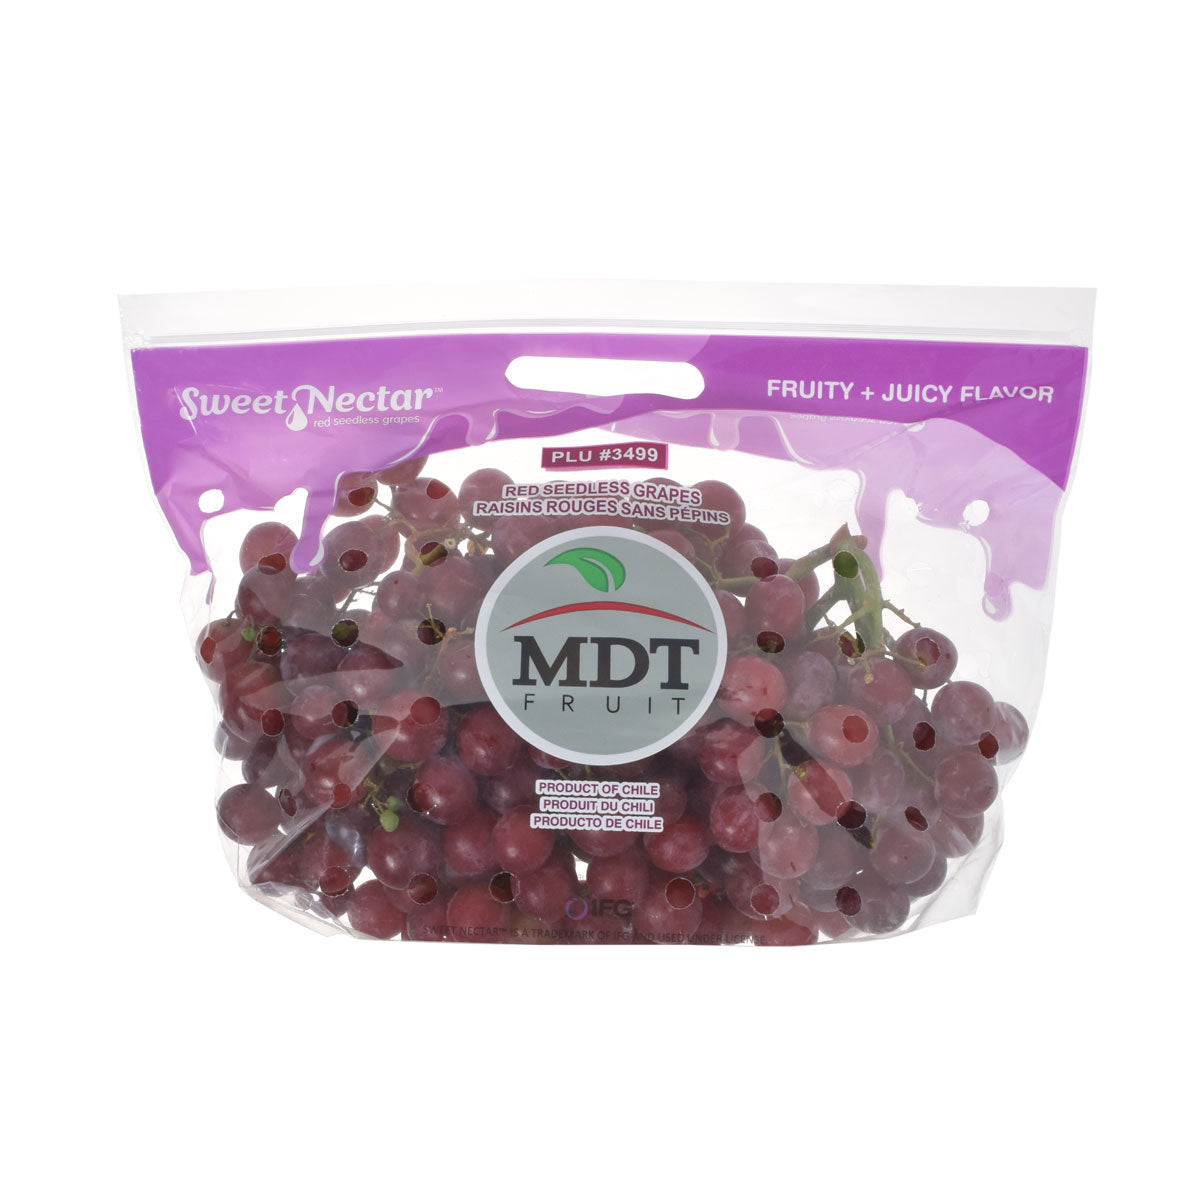 Sweet Nectar Muscat Grapes 16lb 20ct